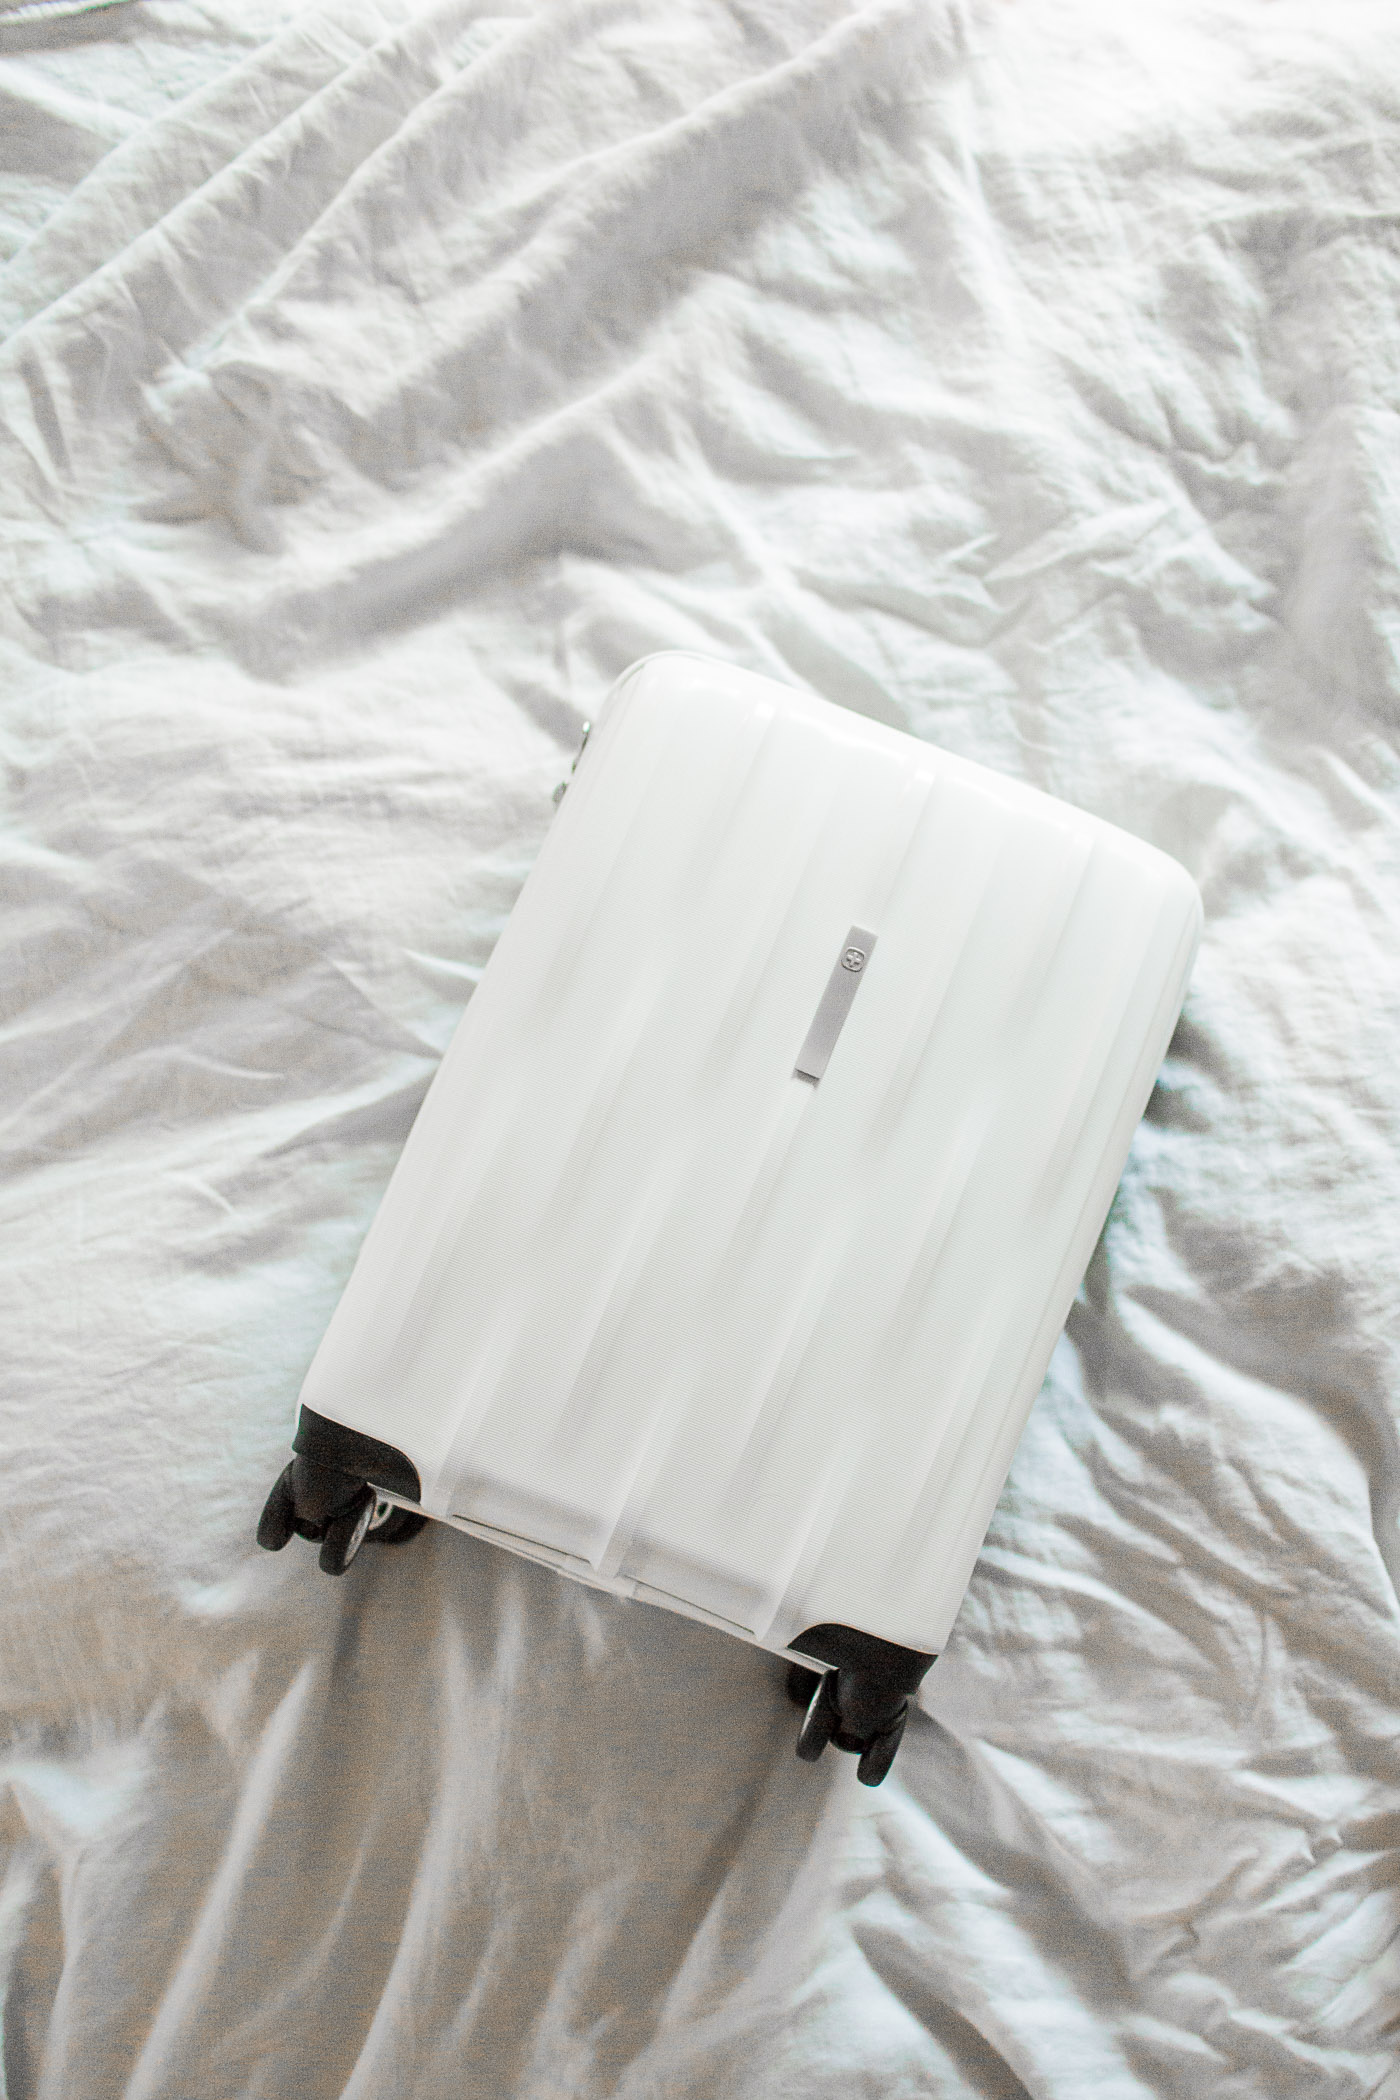 The Travel Light Method by Jessica Doll. Learn to pack for any trip in a single carry on suitcase. #packinglight #travellight #minimalism 